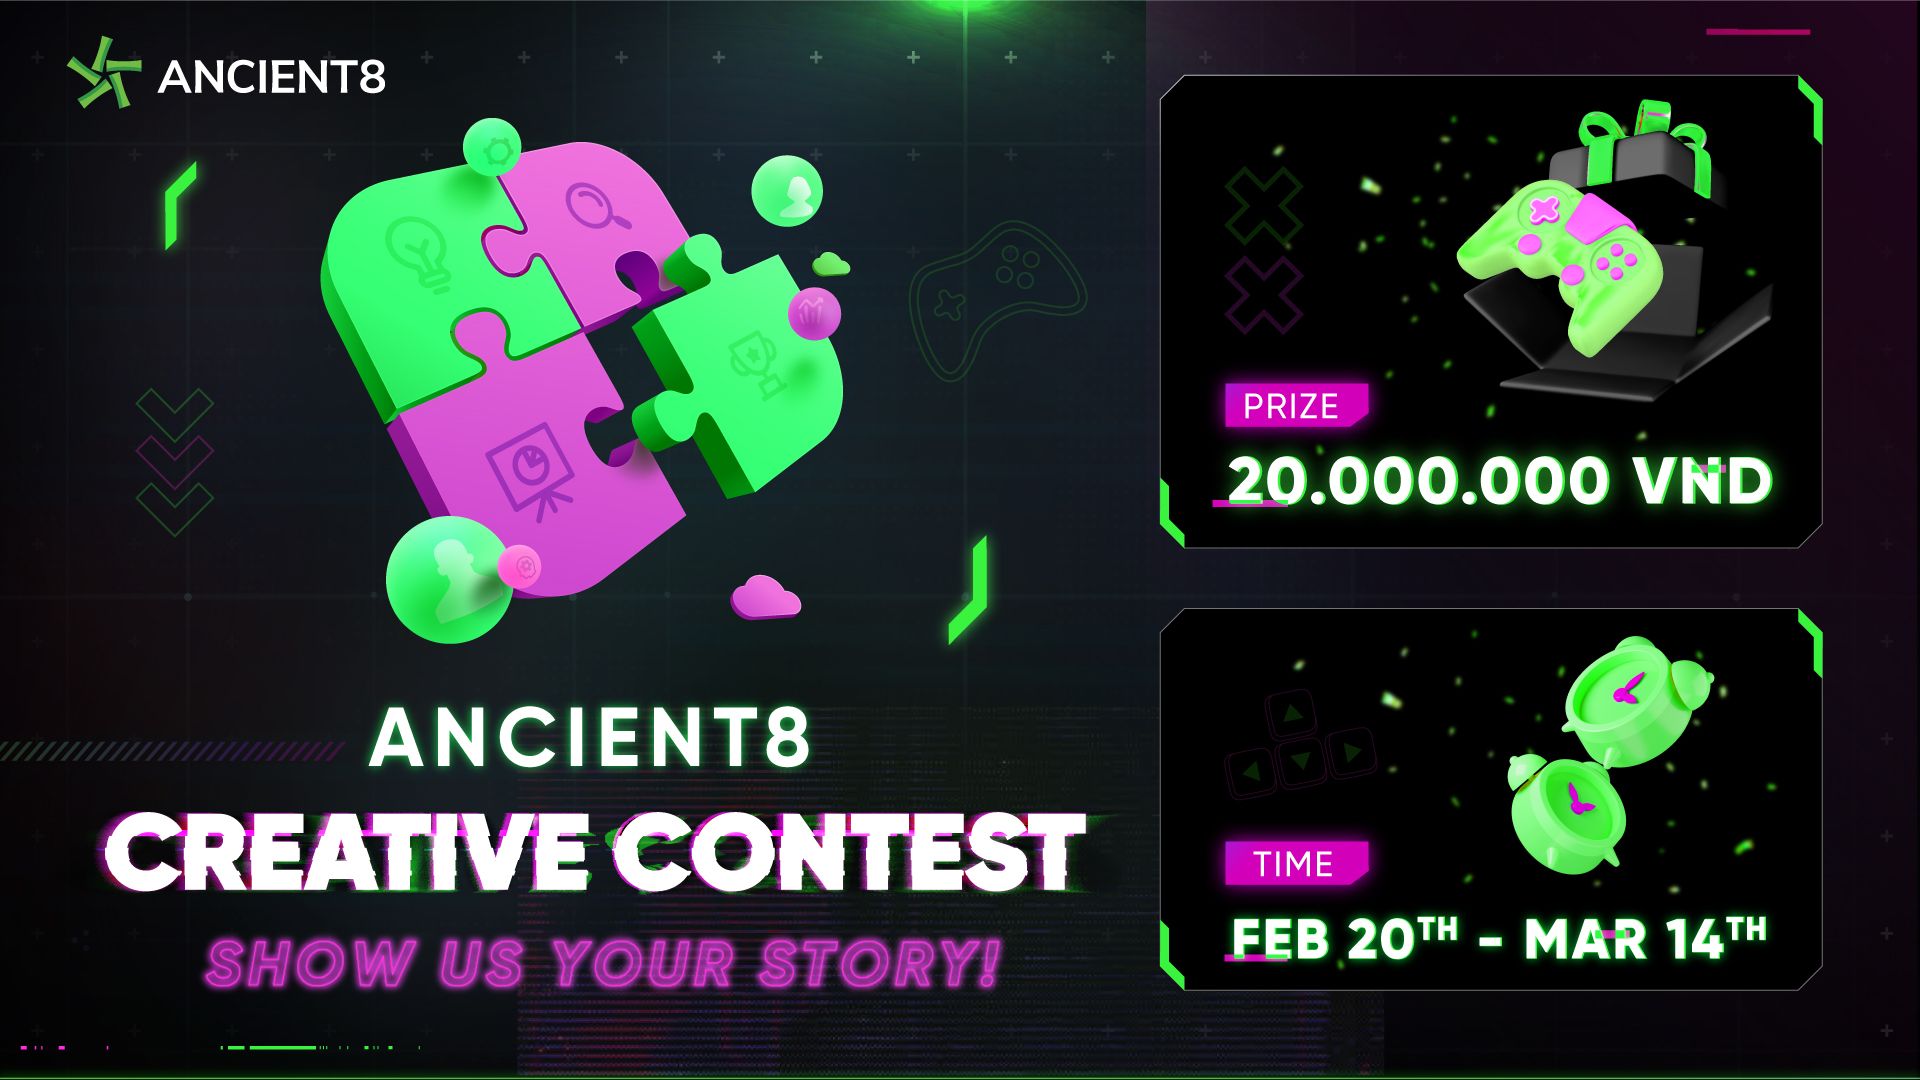 Ancient8 Creative Contest - Show us your story!